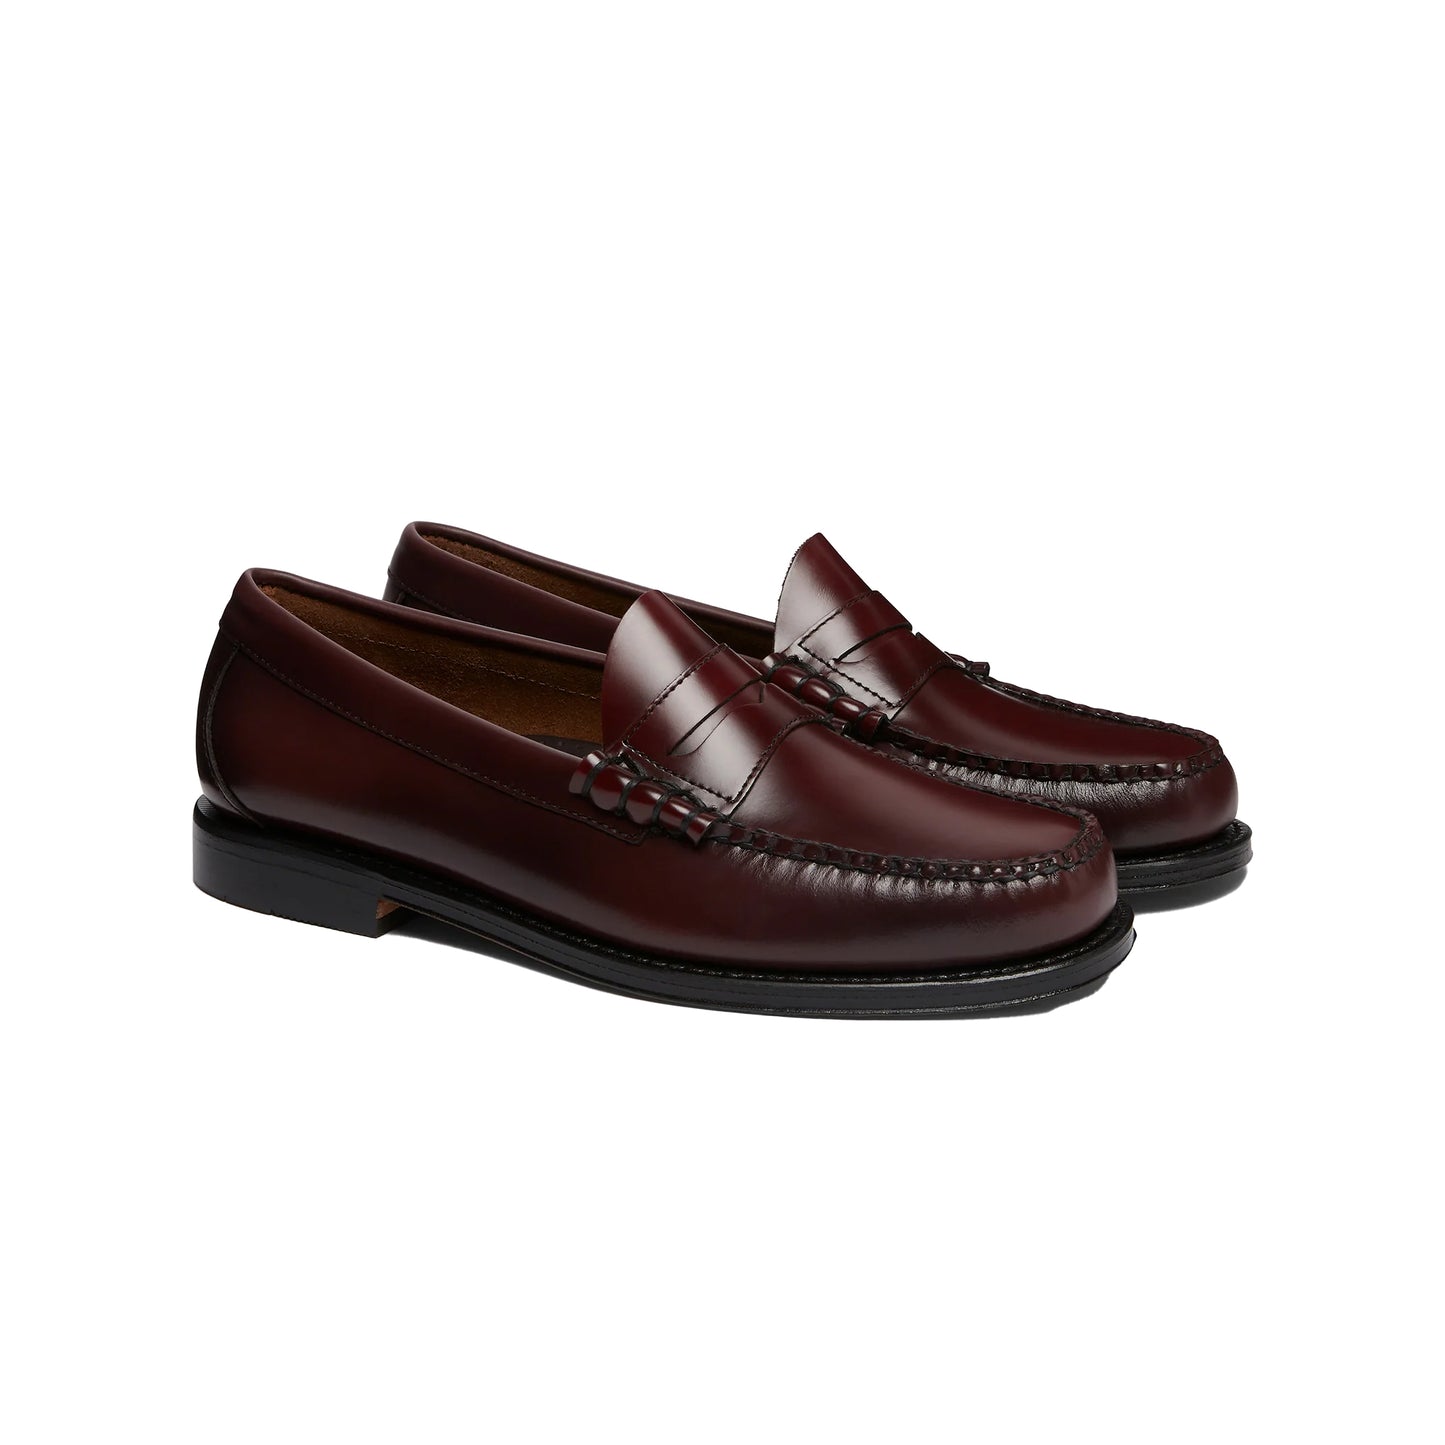 G.H.Bass Weejuns Larson Penny Loafer - Wine